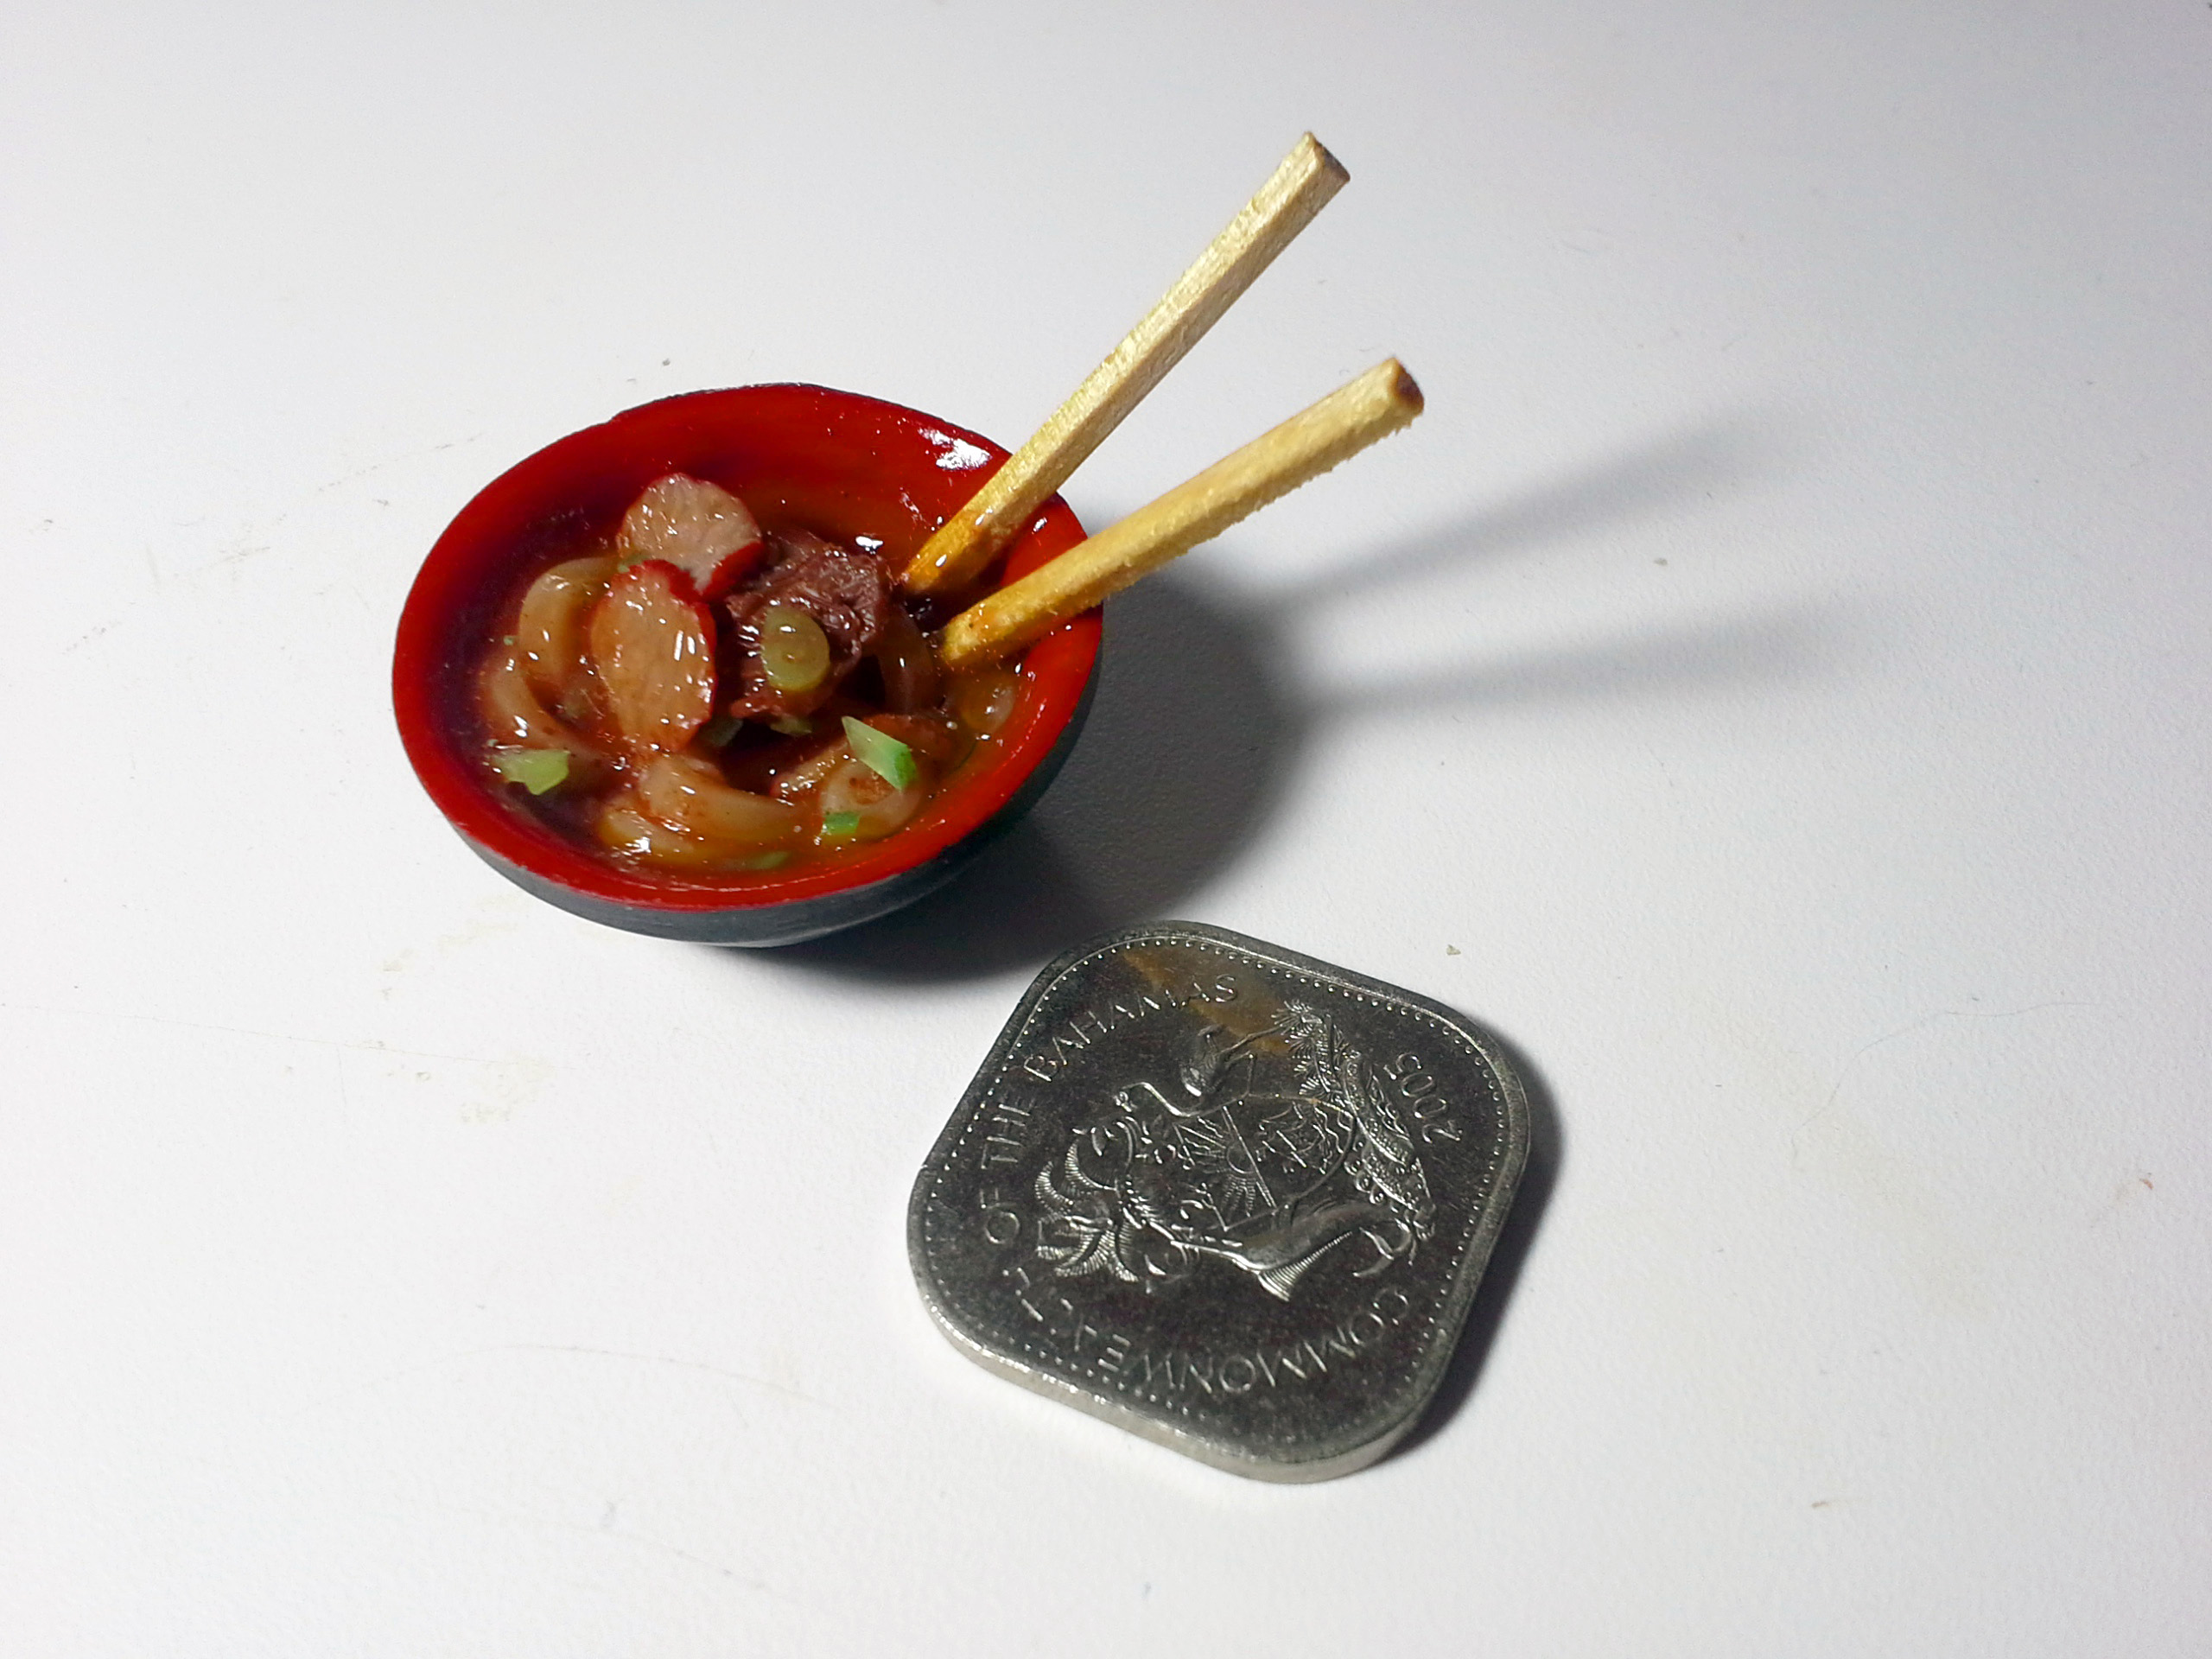 Miniature pork and beef udon soup